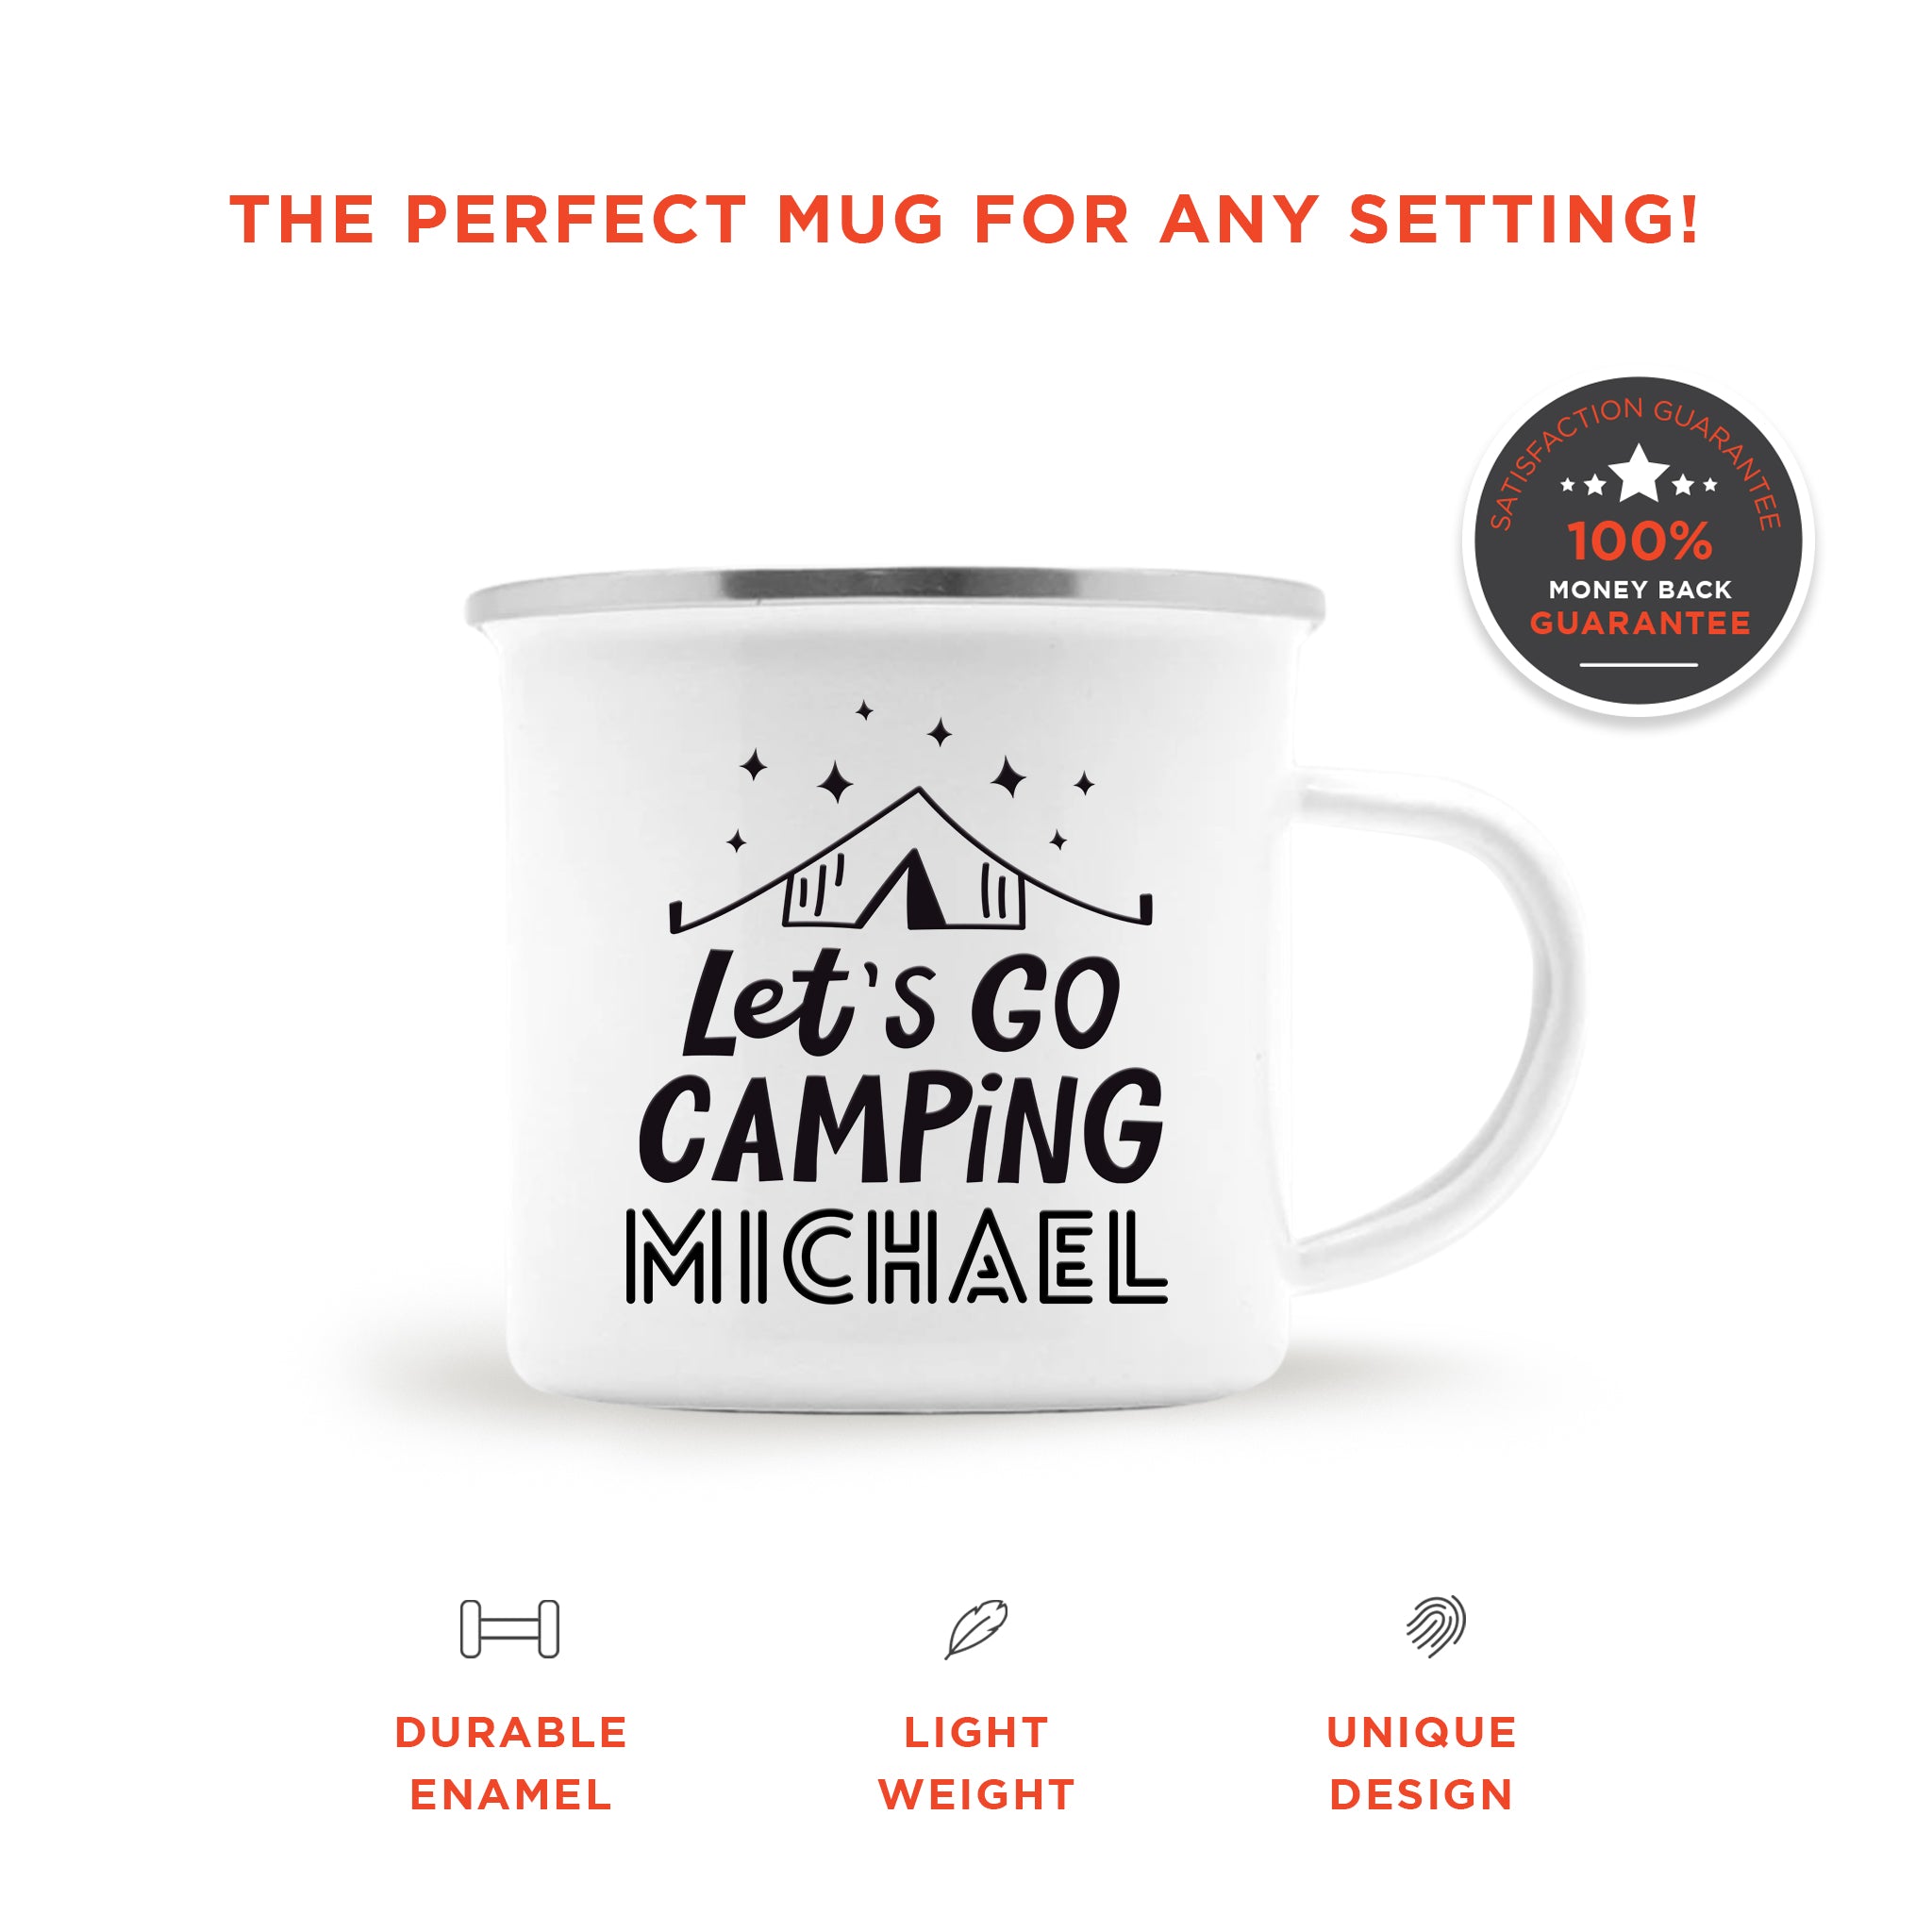 Let's Go Camping Personalized Mug